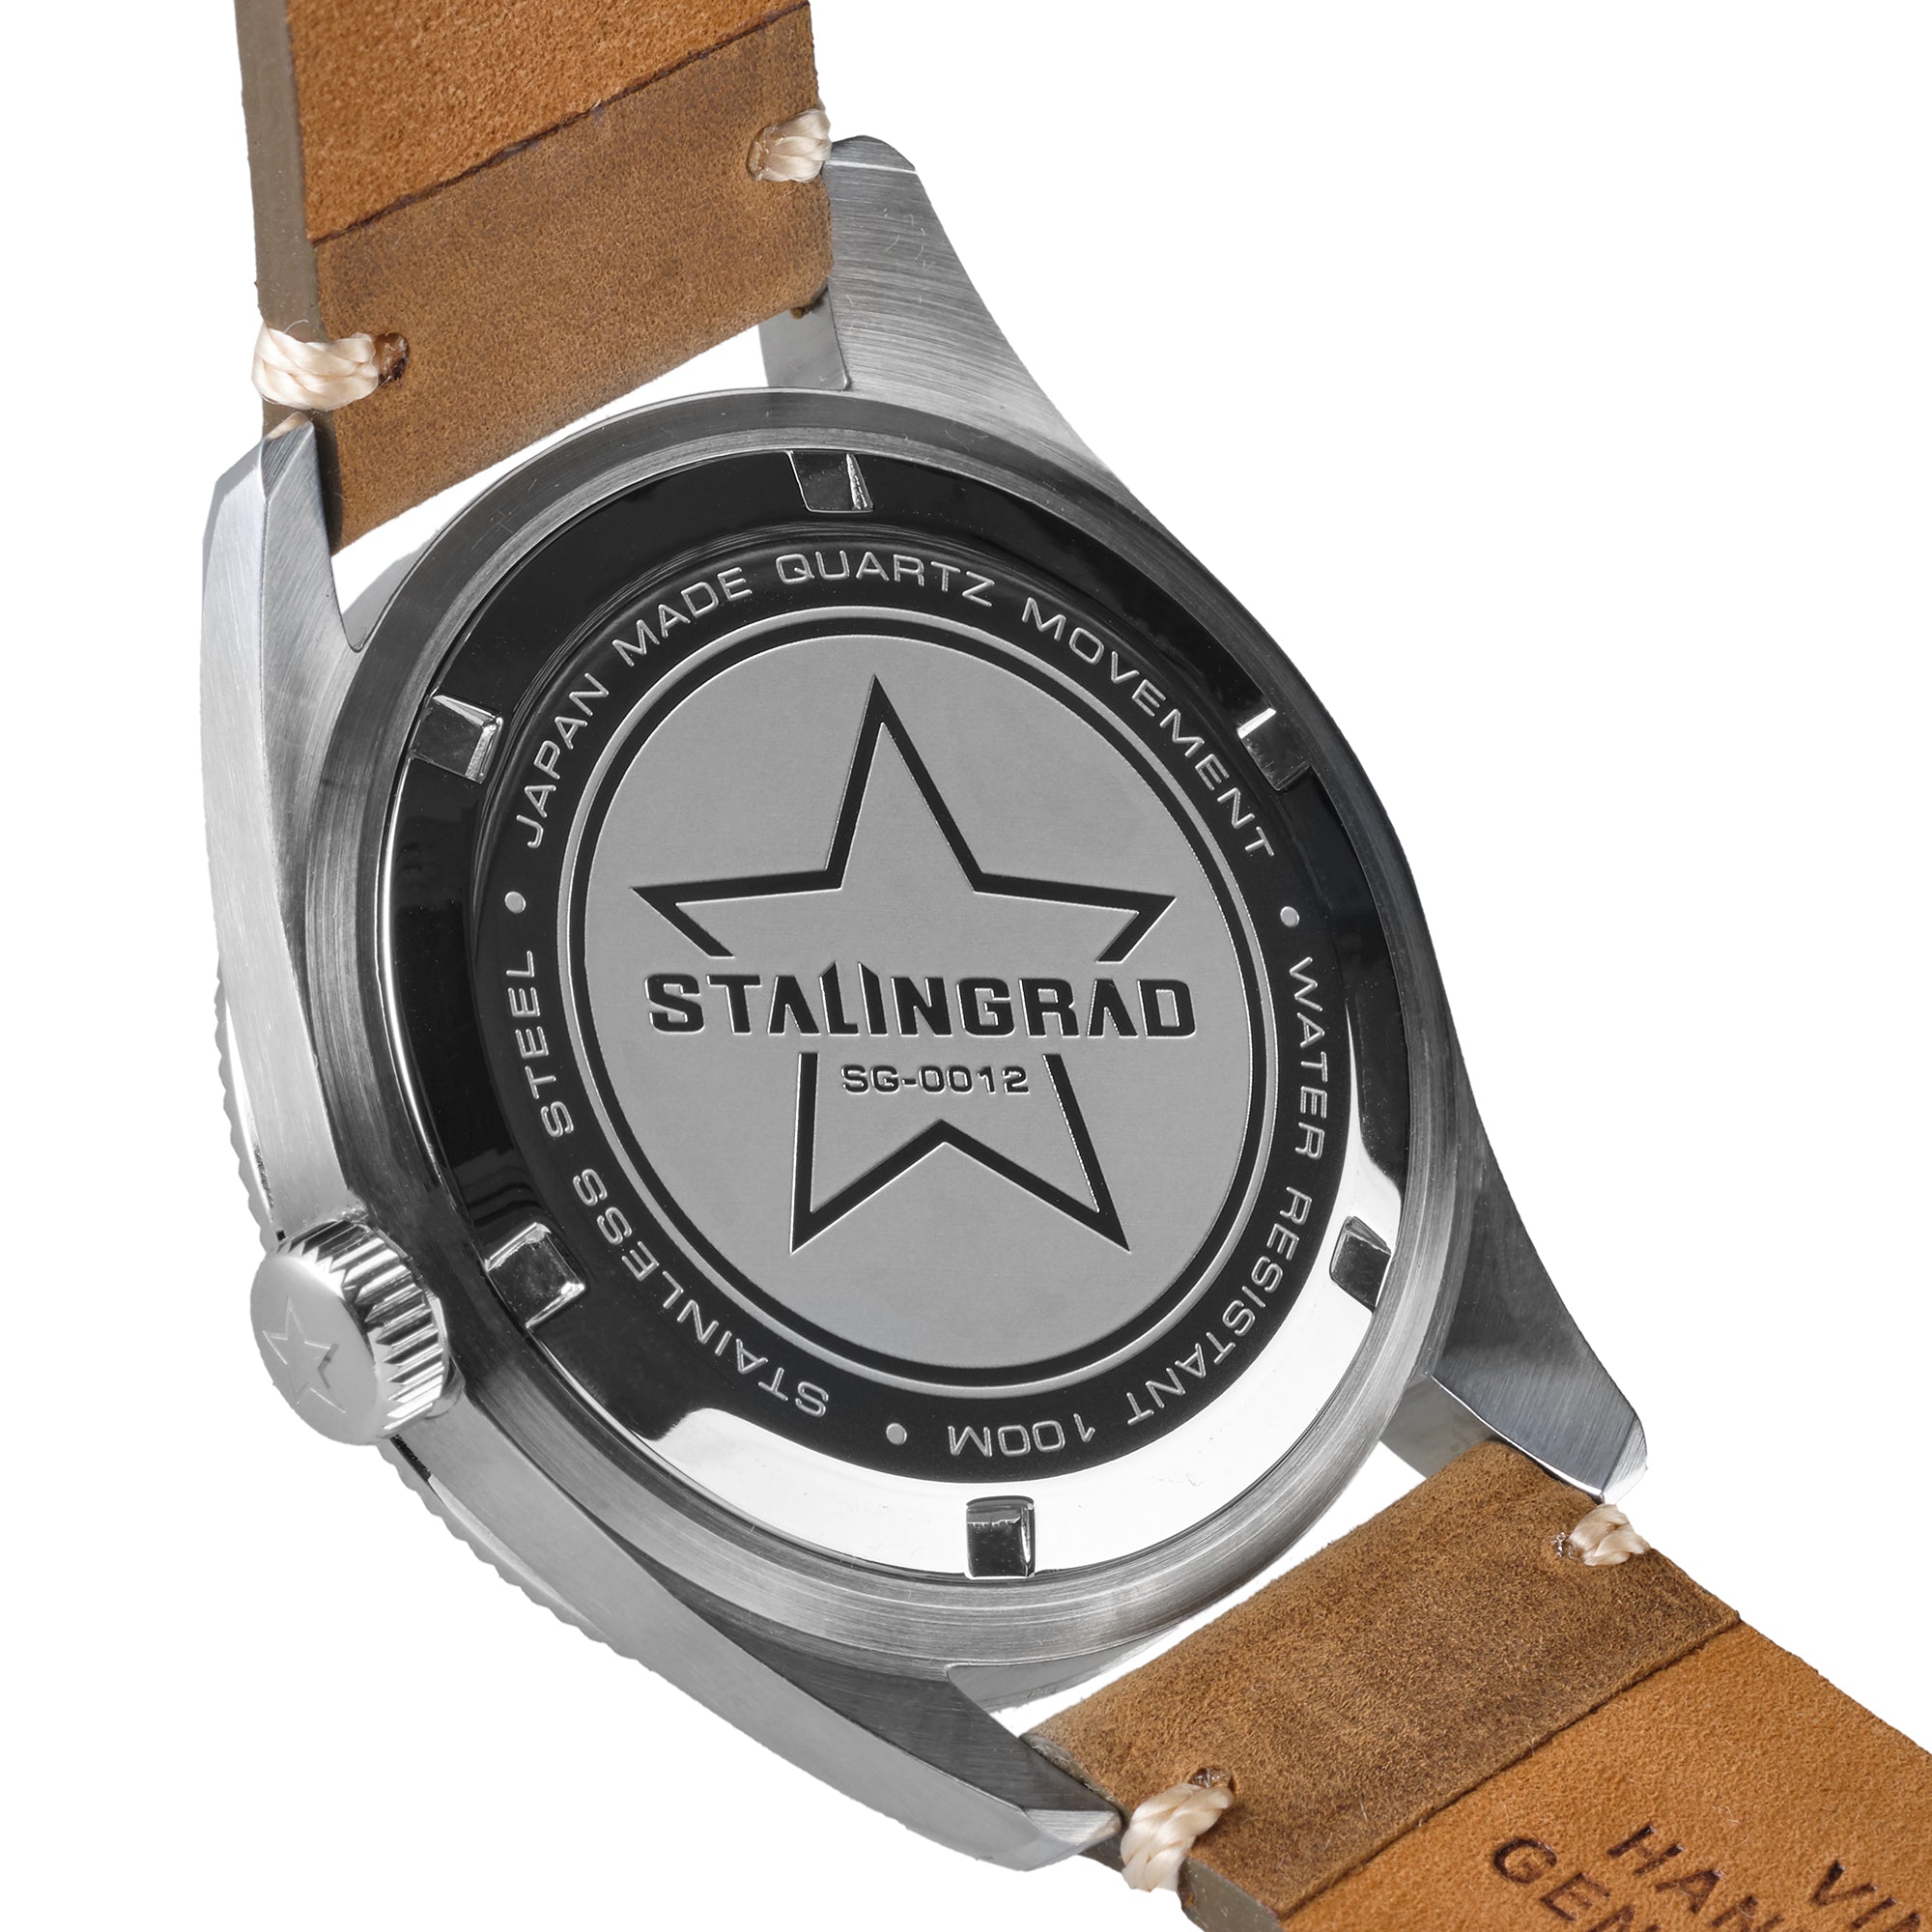 Stalingrad Iron Will Watch Grey Dial, with Black Bezel and a tan leather strap on a white background, back of watch view